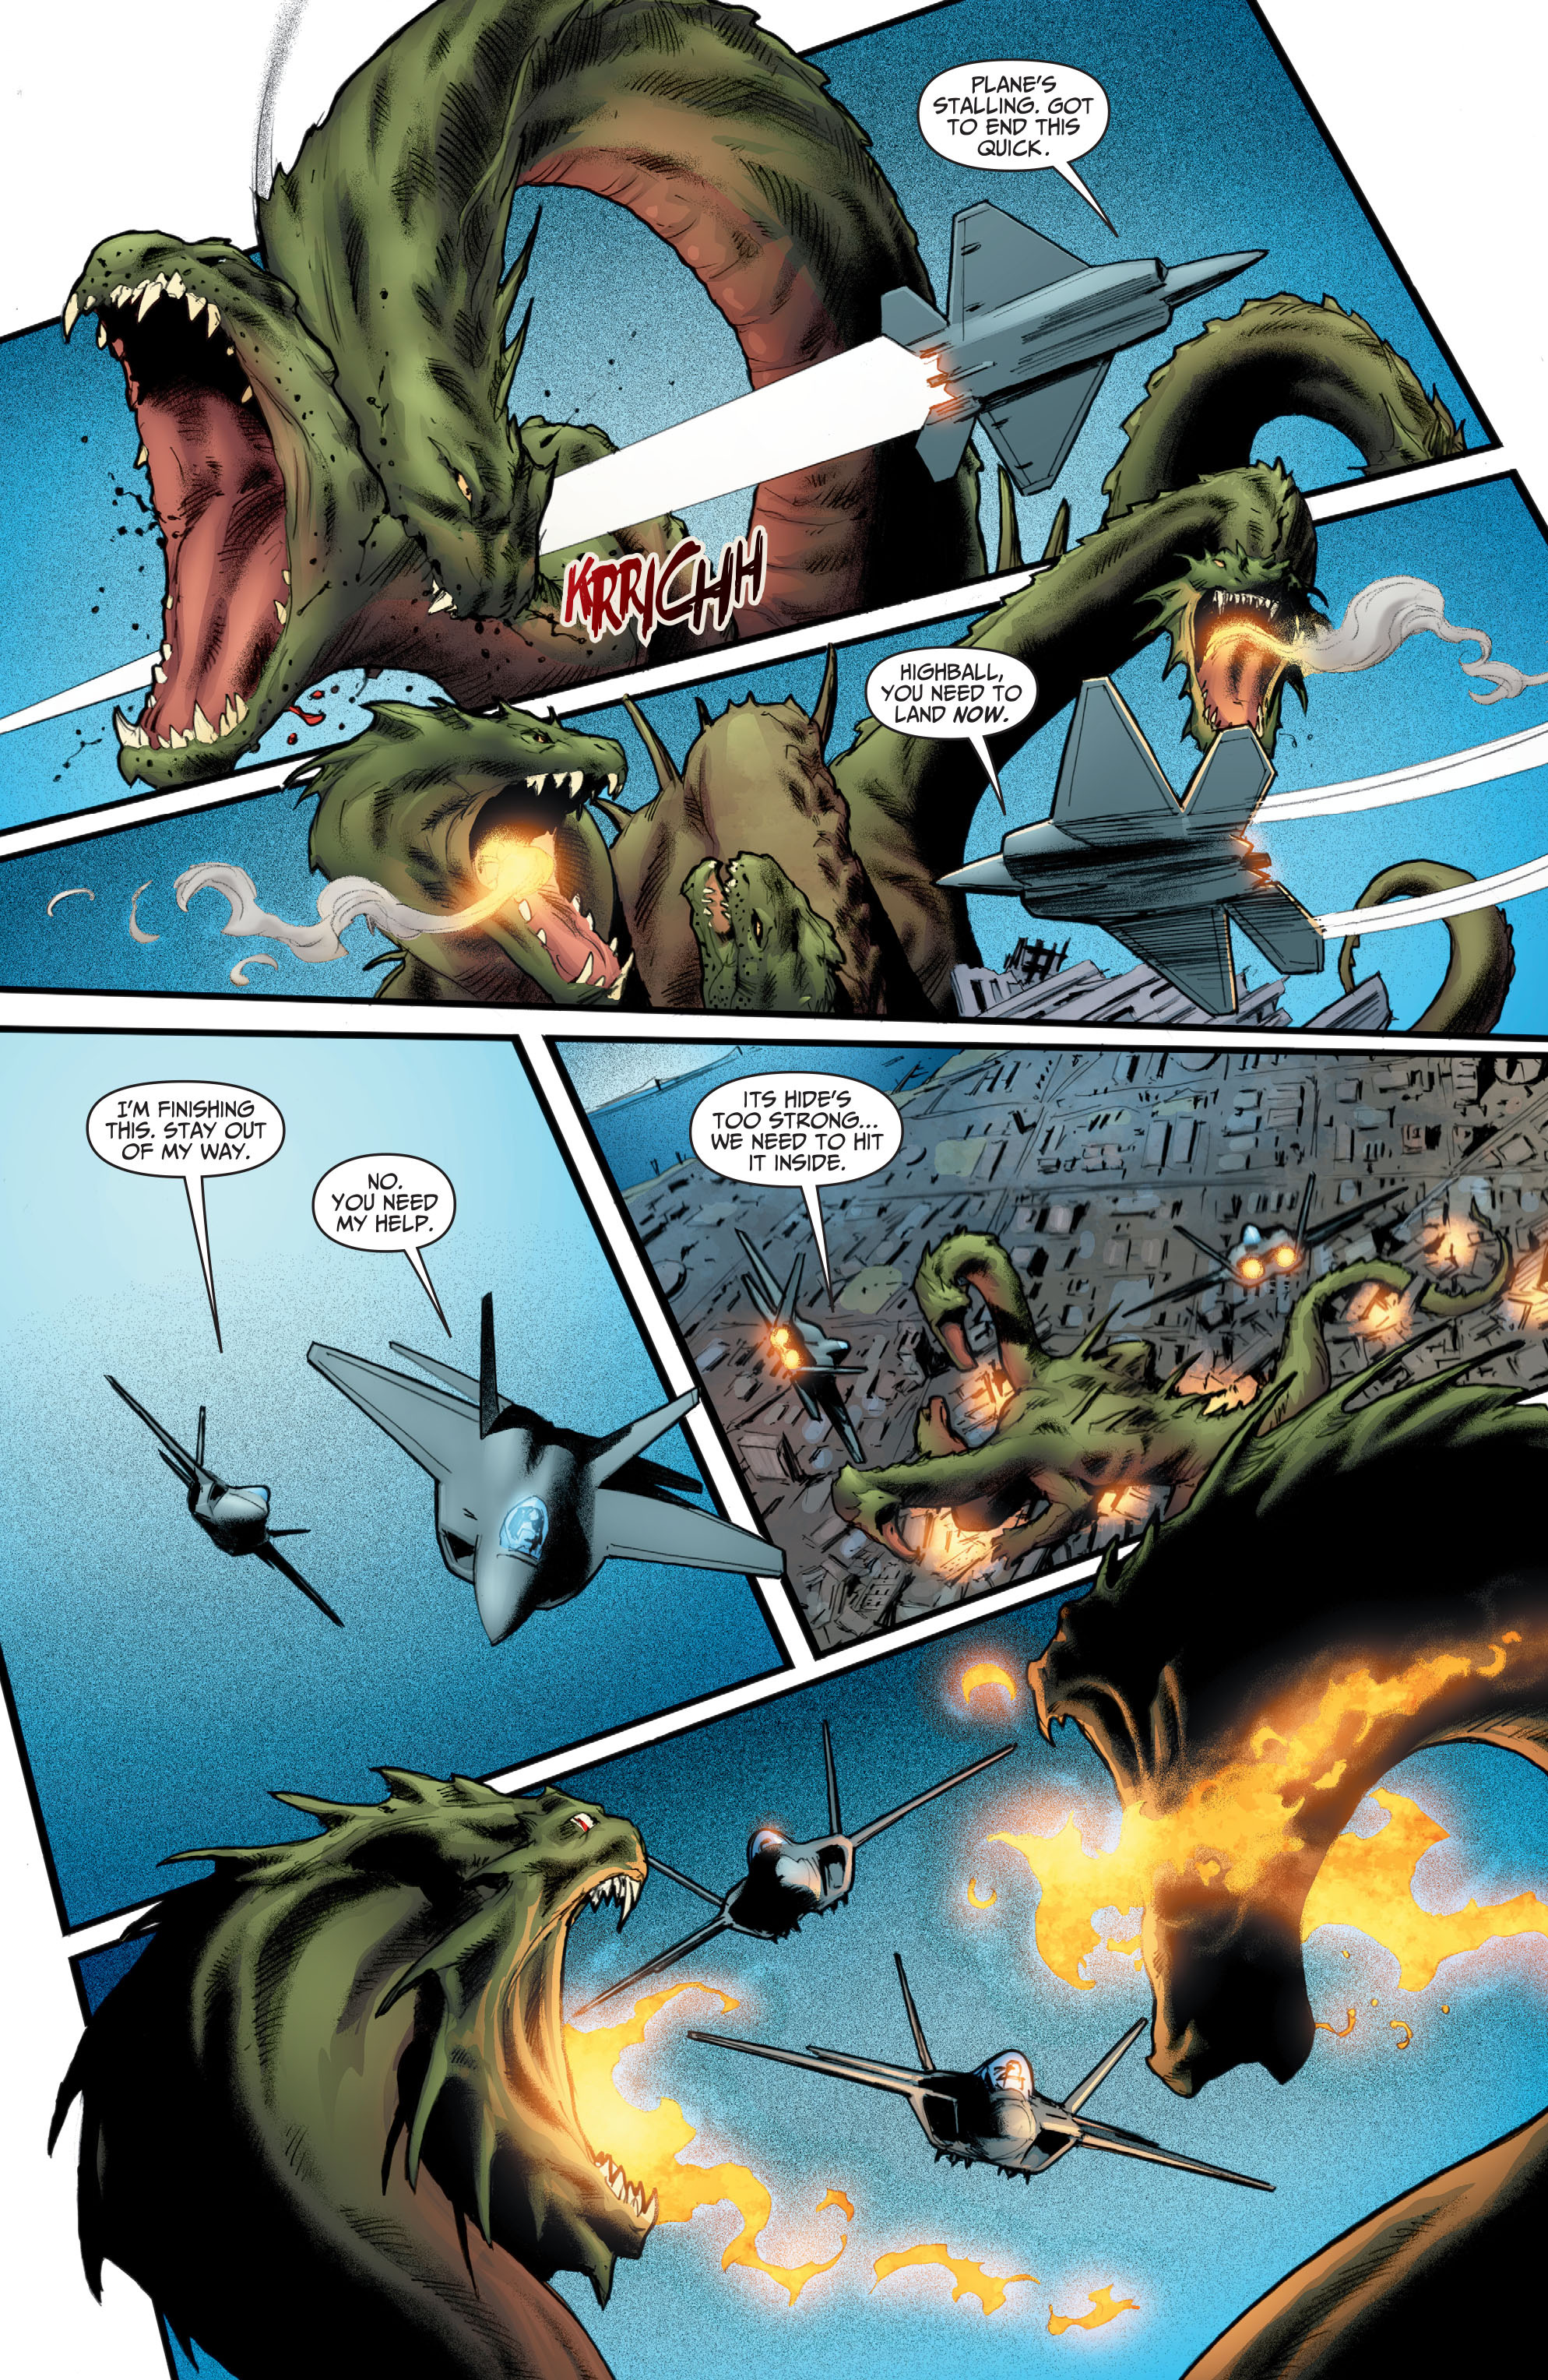 Flashpoint: The World of Flashpoint Featuring Green Lantern Full #1 - English 177